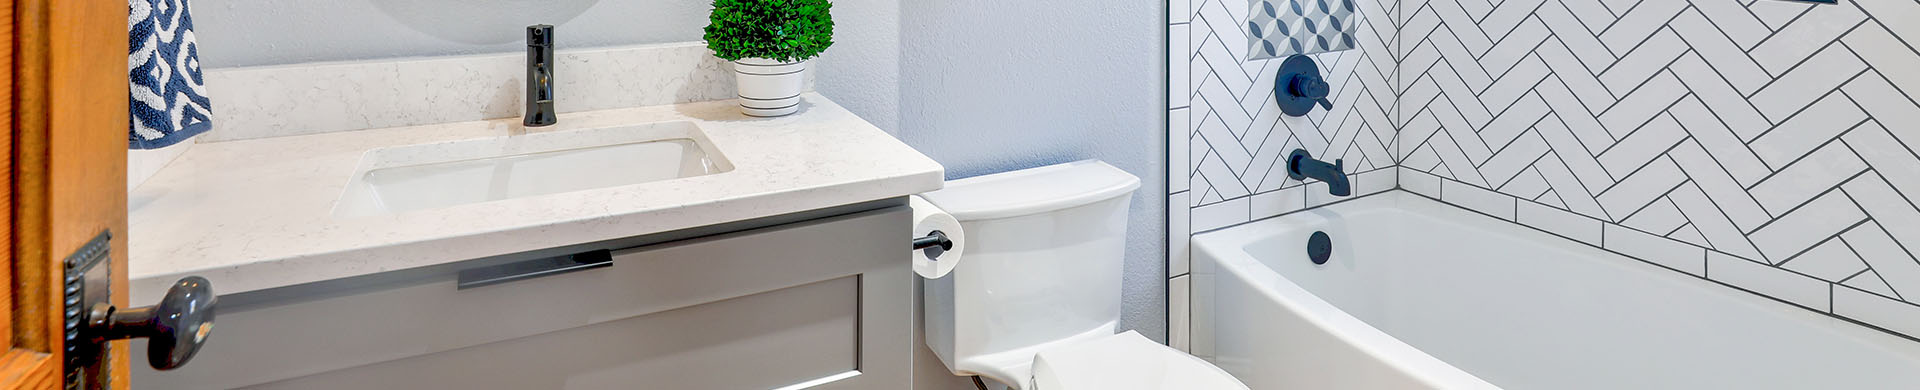 Bathroom Remodeling: A Step-By-Step Guide | Budget Dumpster